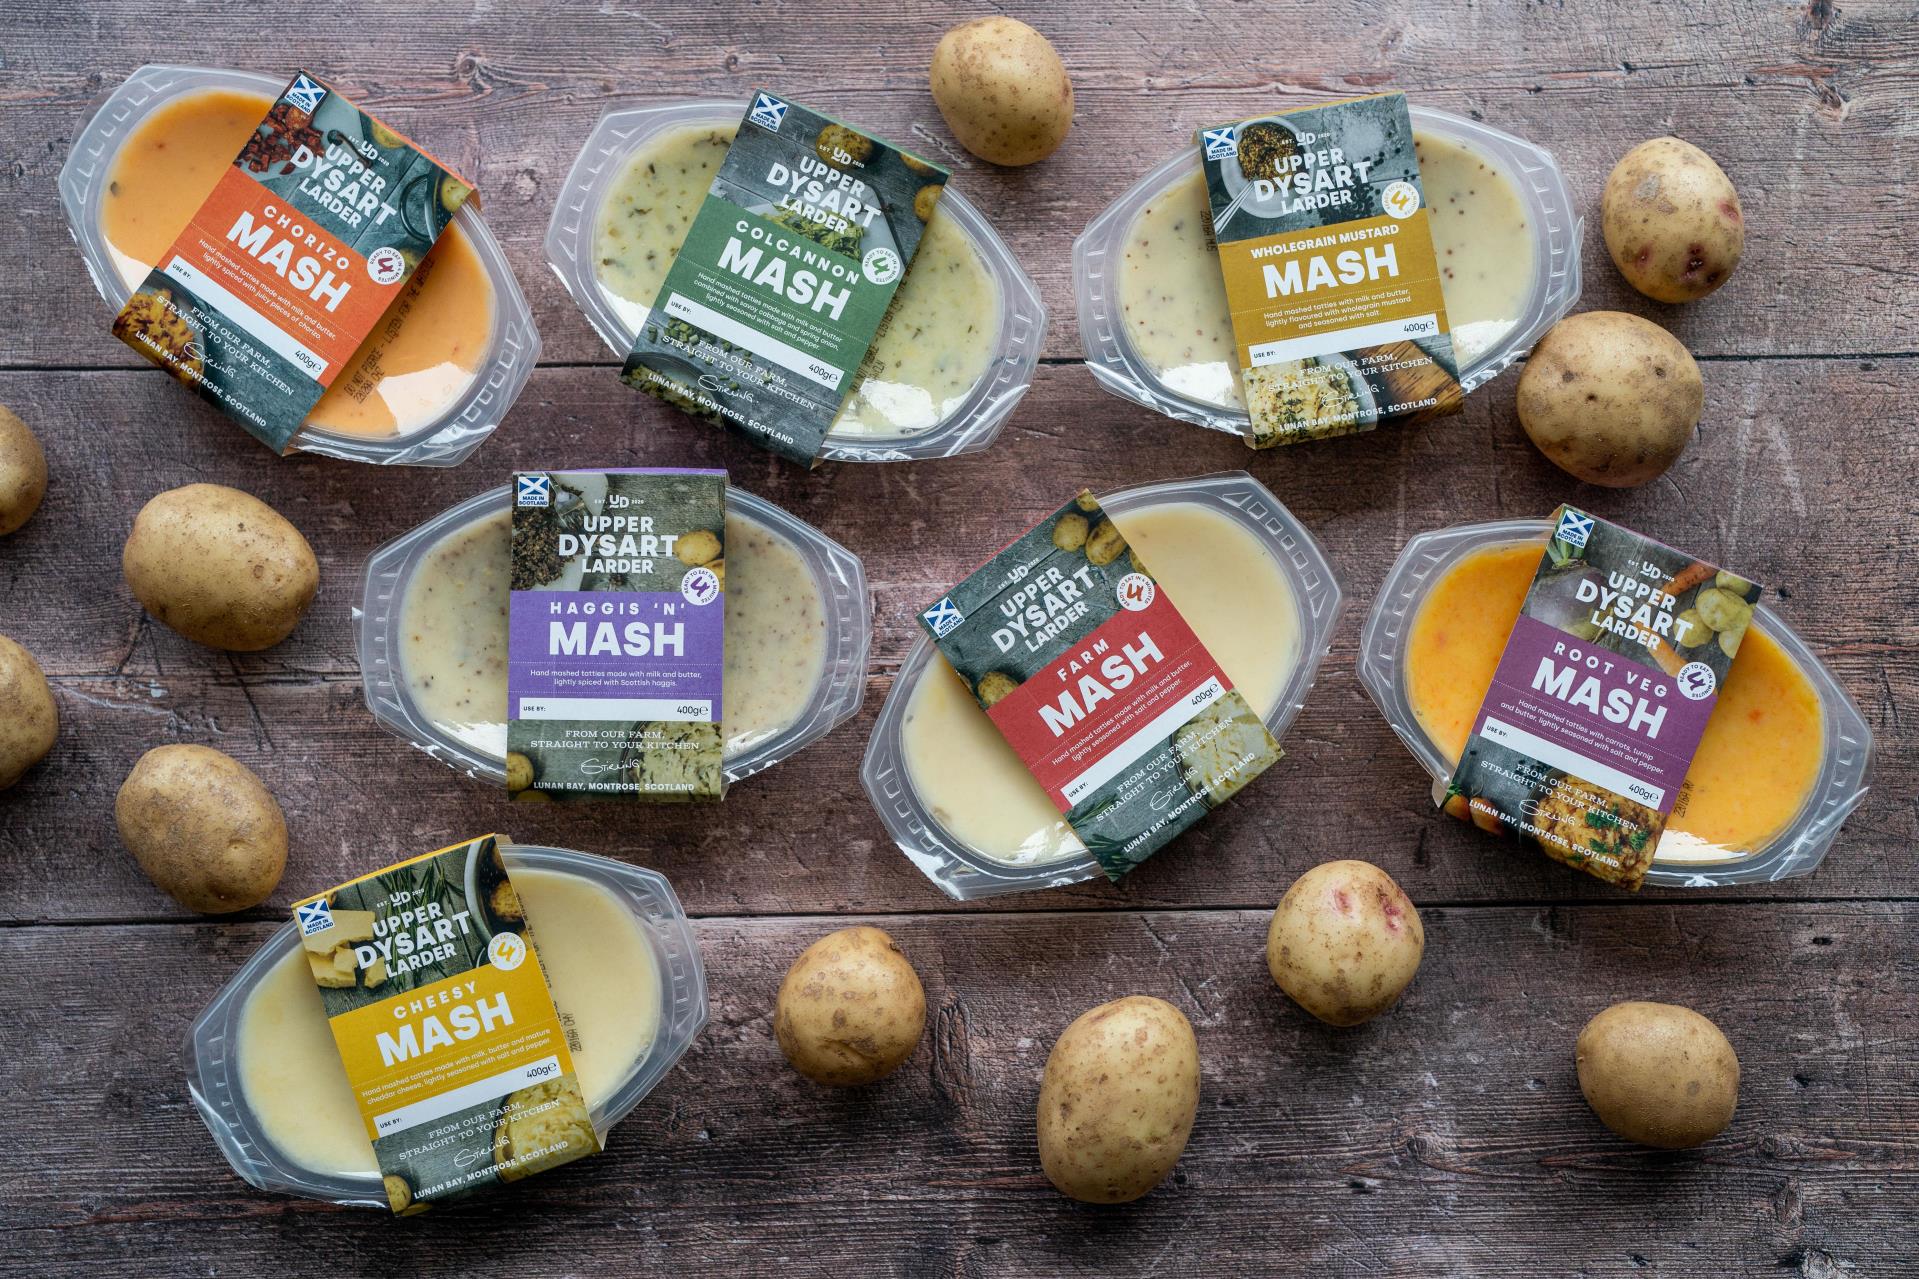 The family has produced a range of ready-made mashed potato products.